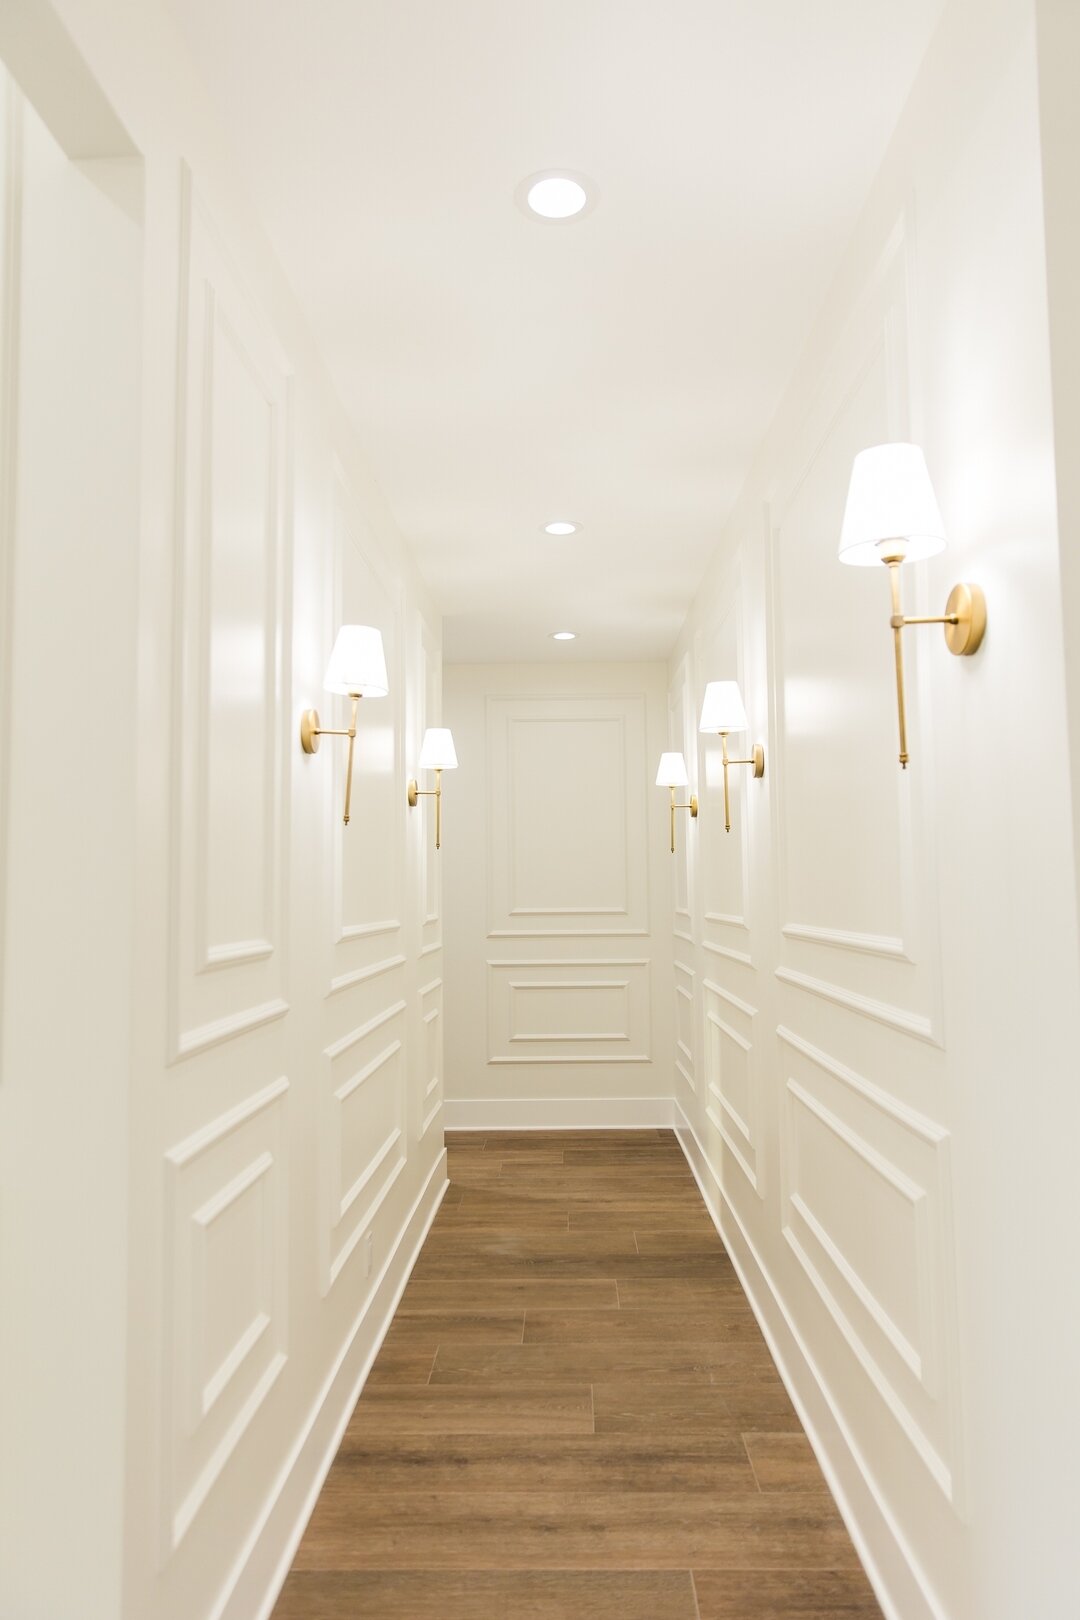 It&rsquo;s all in the details ☁️💡 We helped transform this hallway into an inviting pathway by painting the intricate wall paneling a creamy white